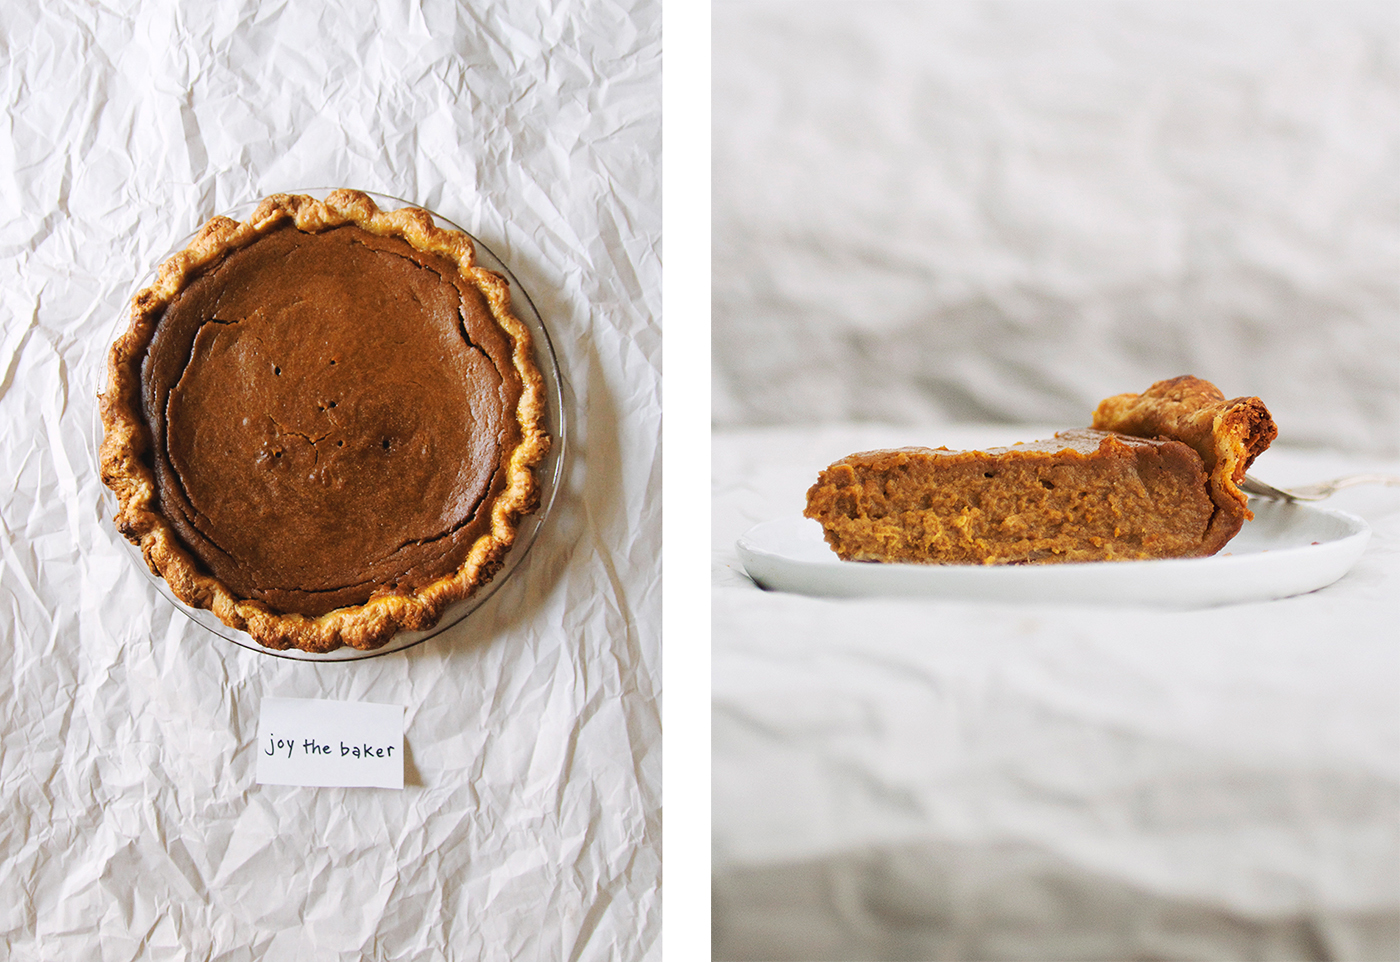 From left to right: Overhead view and sideview of Joy the Baker's pumpkin pie recipe